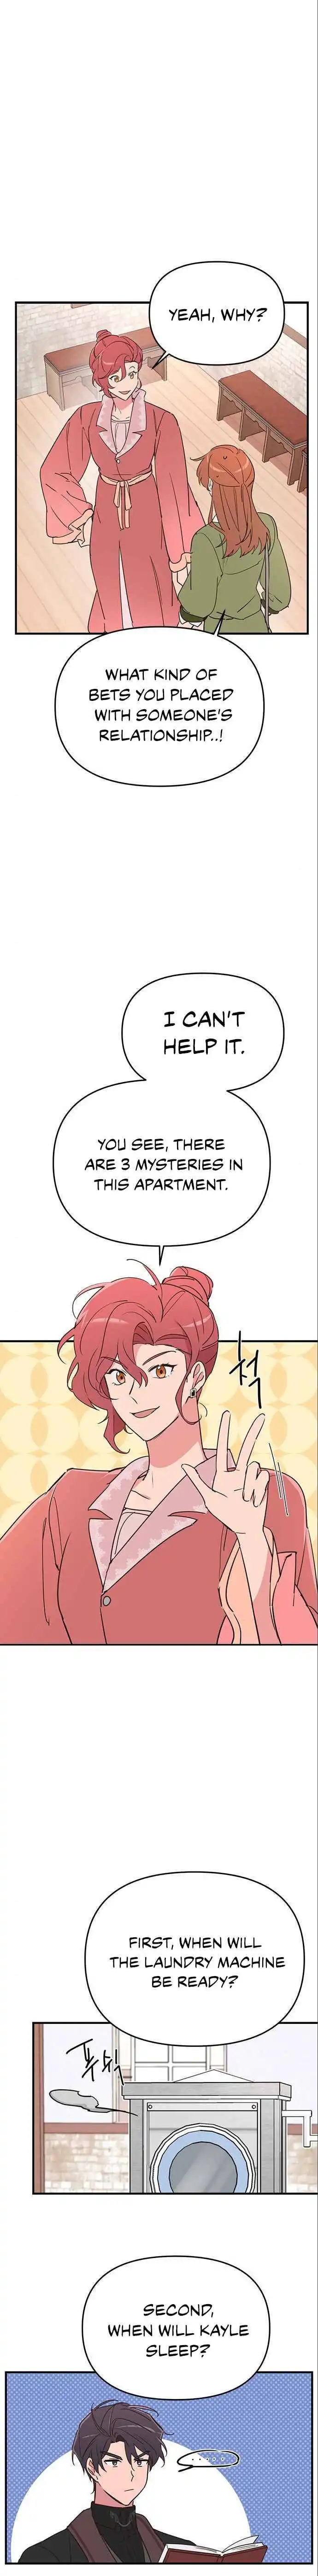 Single Wizard's Dormitory Apartment Chapter 8